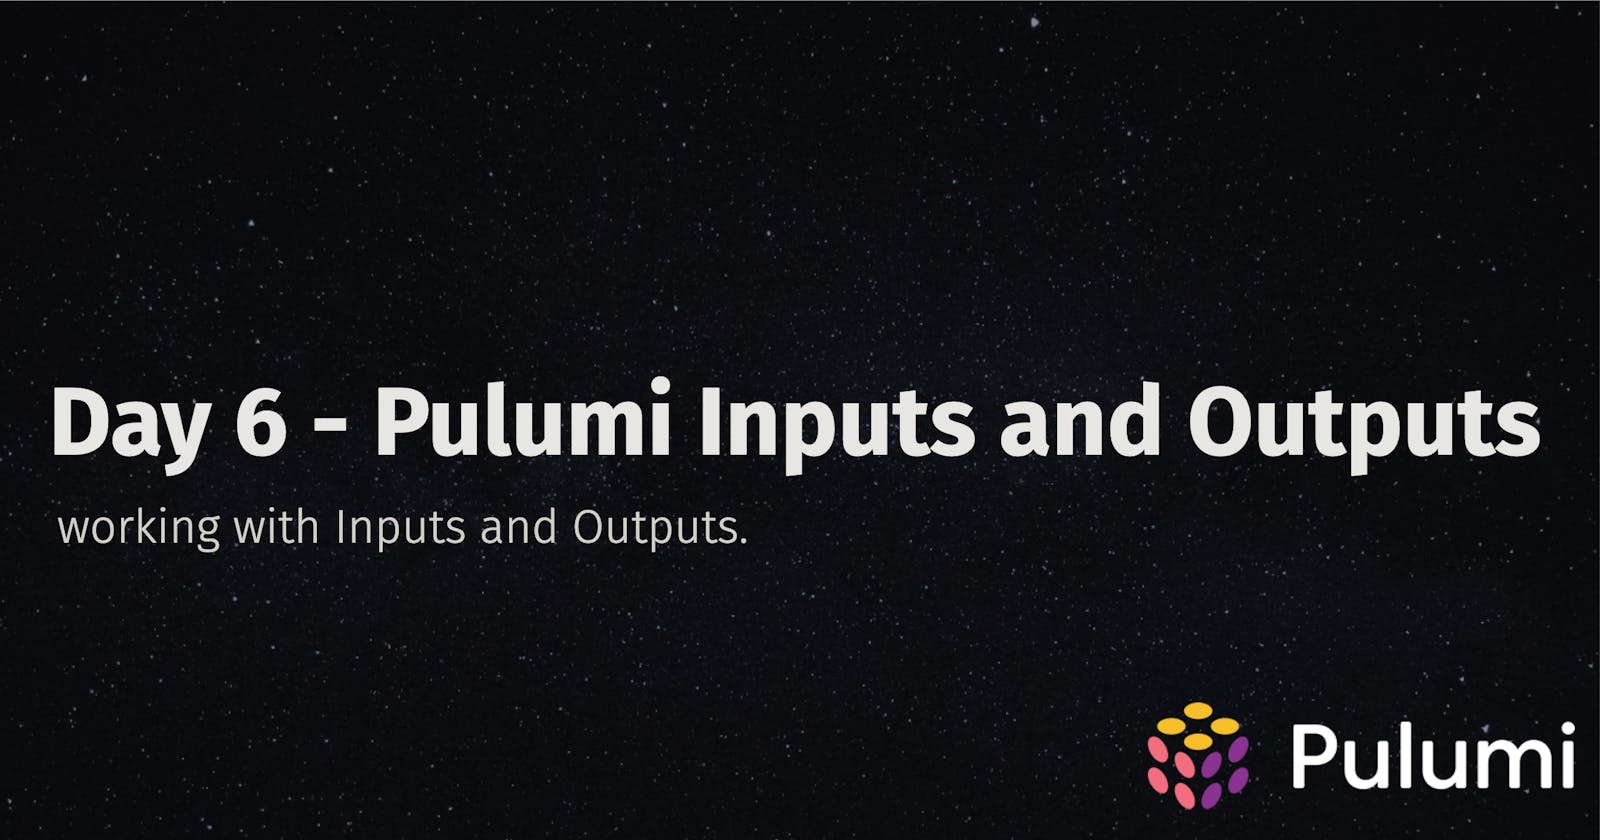 Day 6 - Pulumi Inputs and Outputs